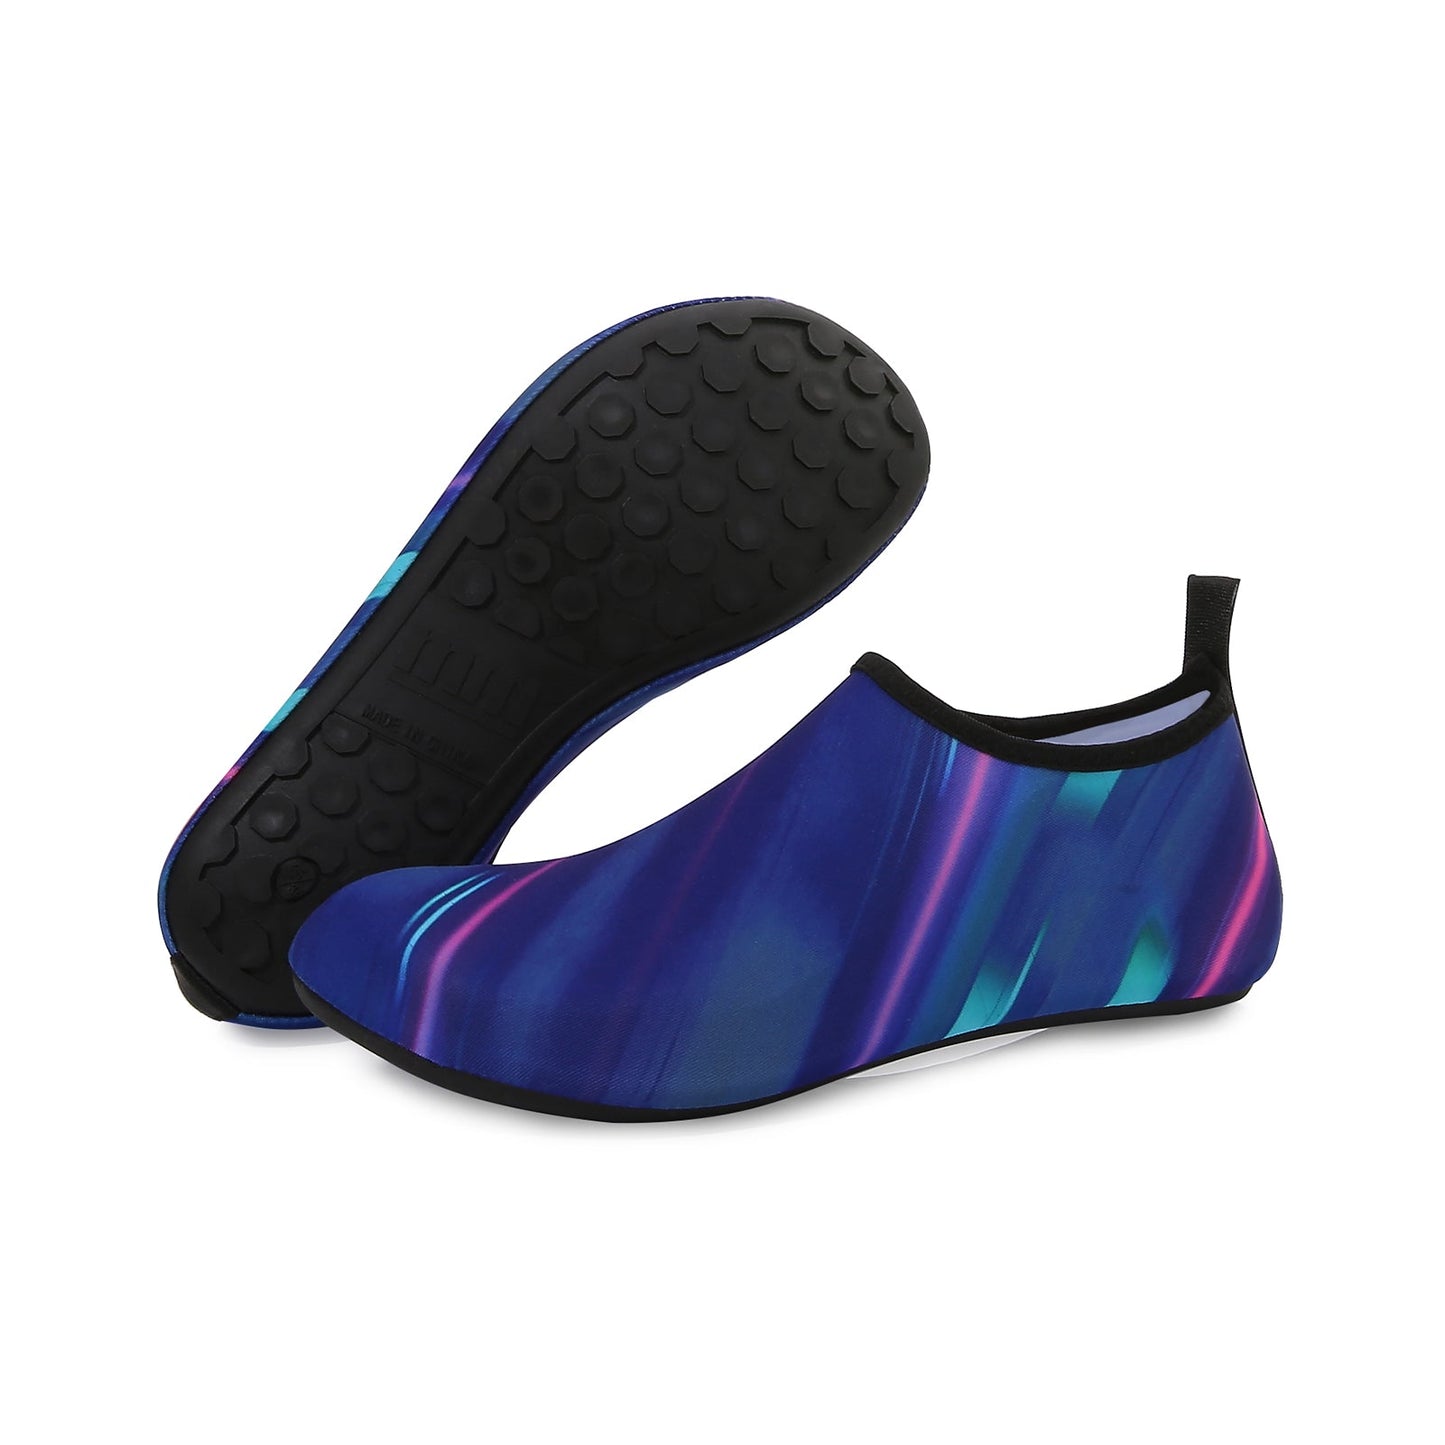 Men and Women a Slip On Barefoot Quick-Dry Beach Aqua Yoga Water Shoes (Laser Glare/Navy)